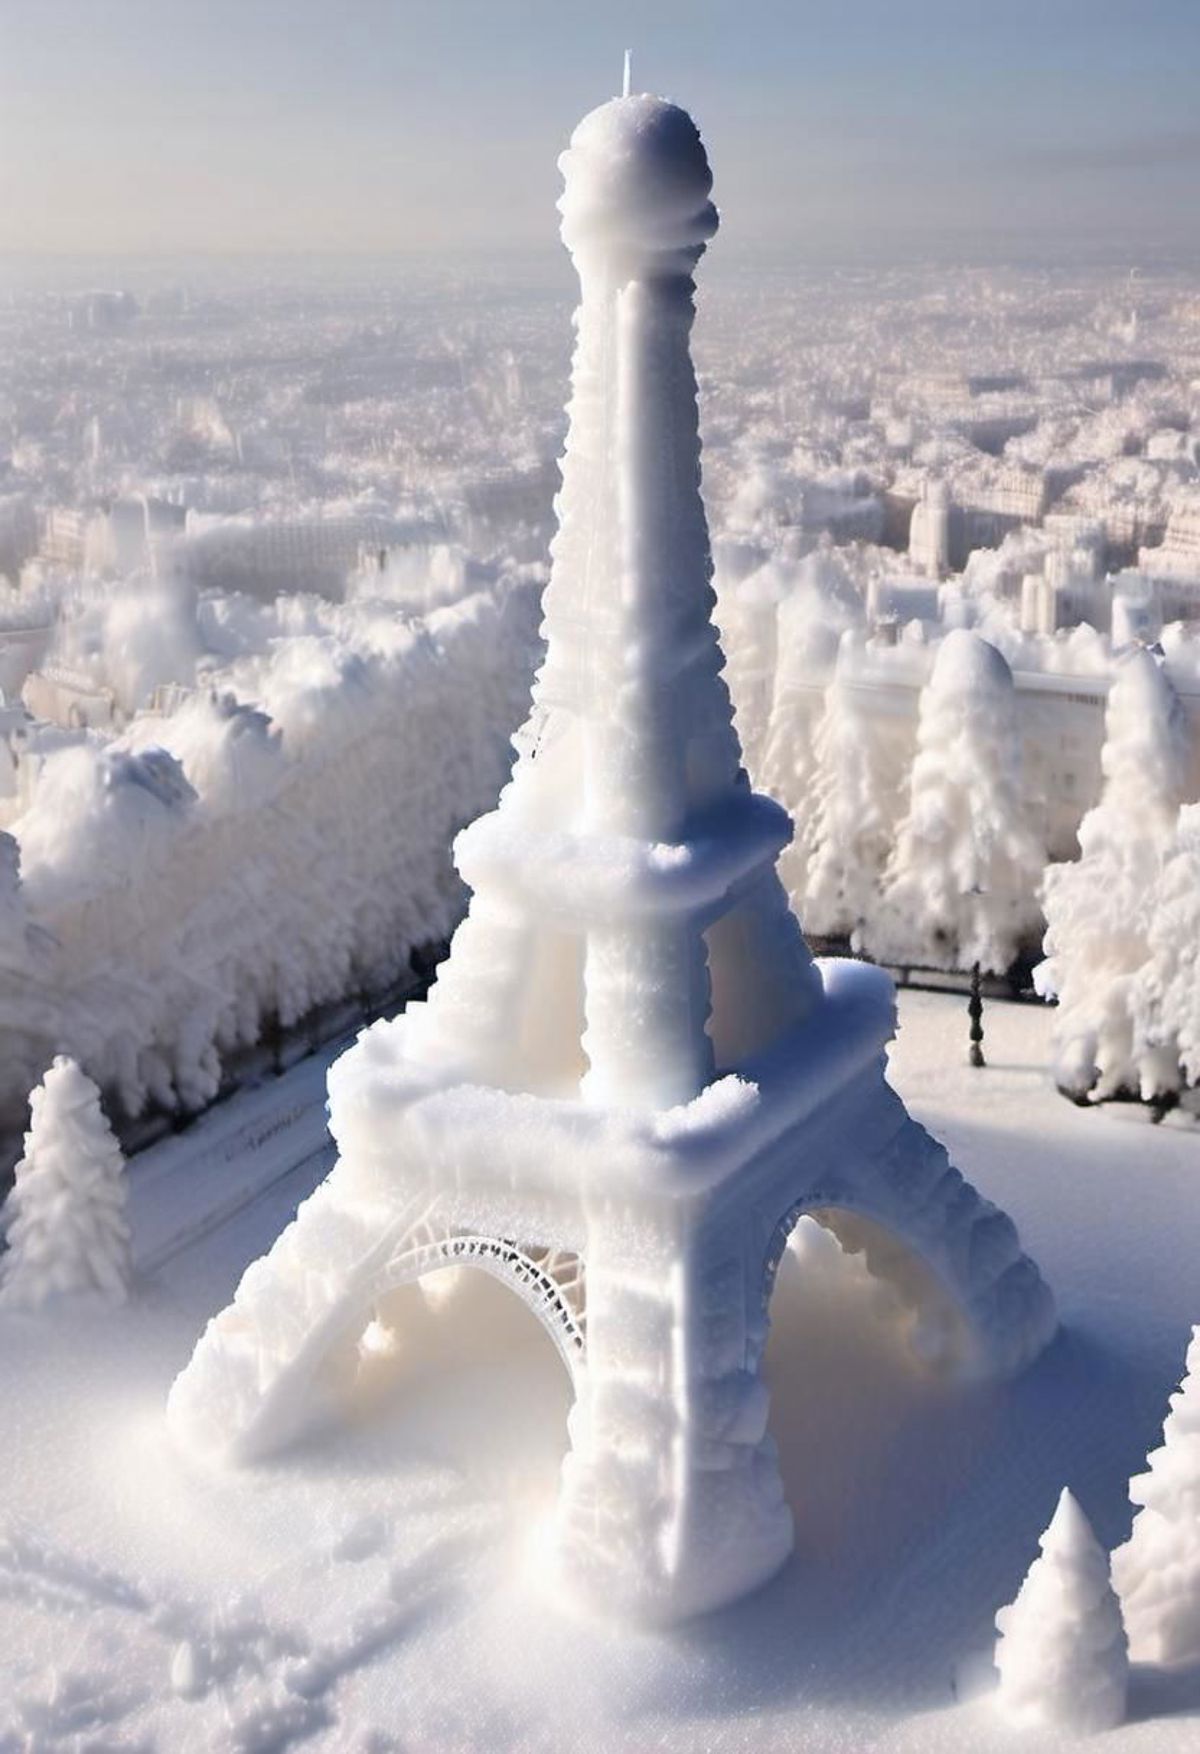 A snow-covered Eiffel Tower in Paris